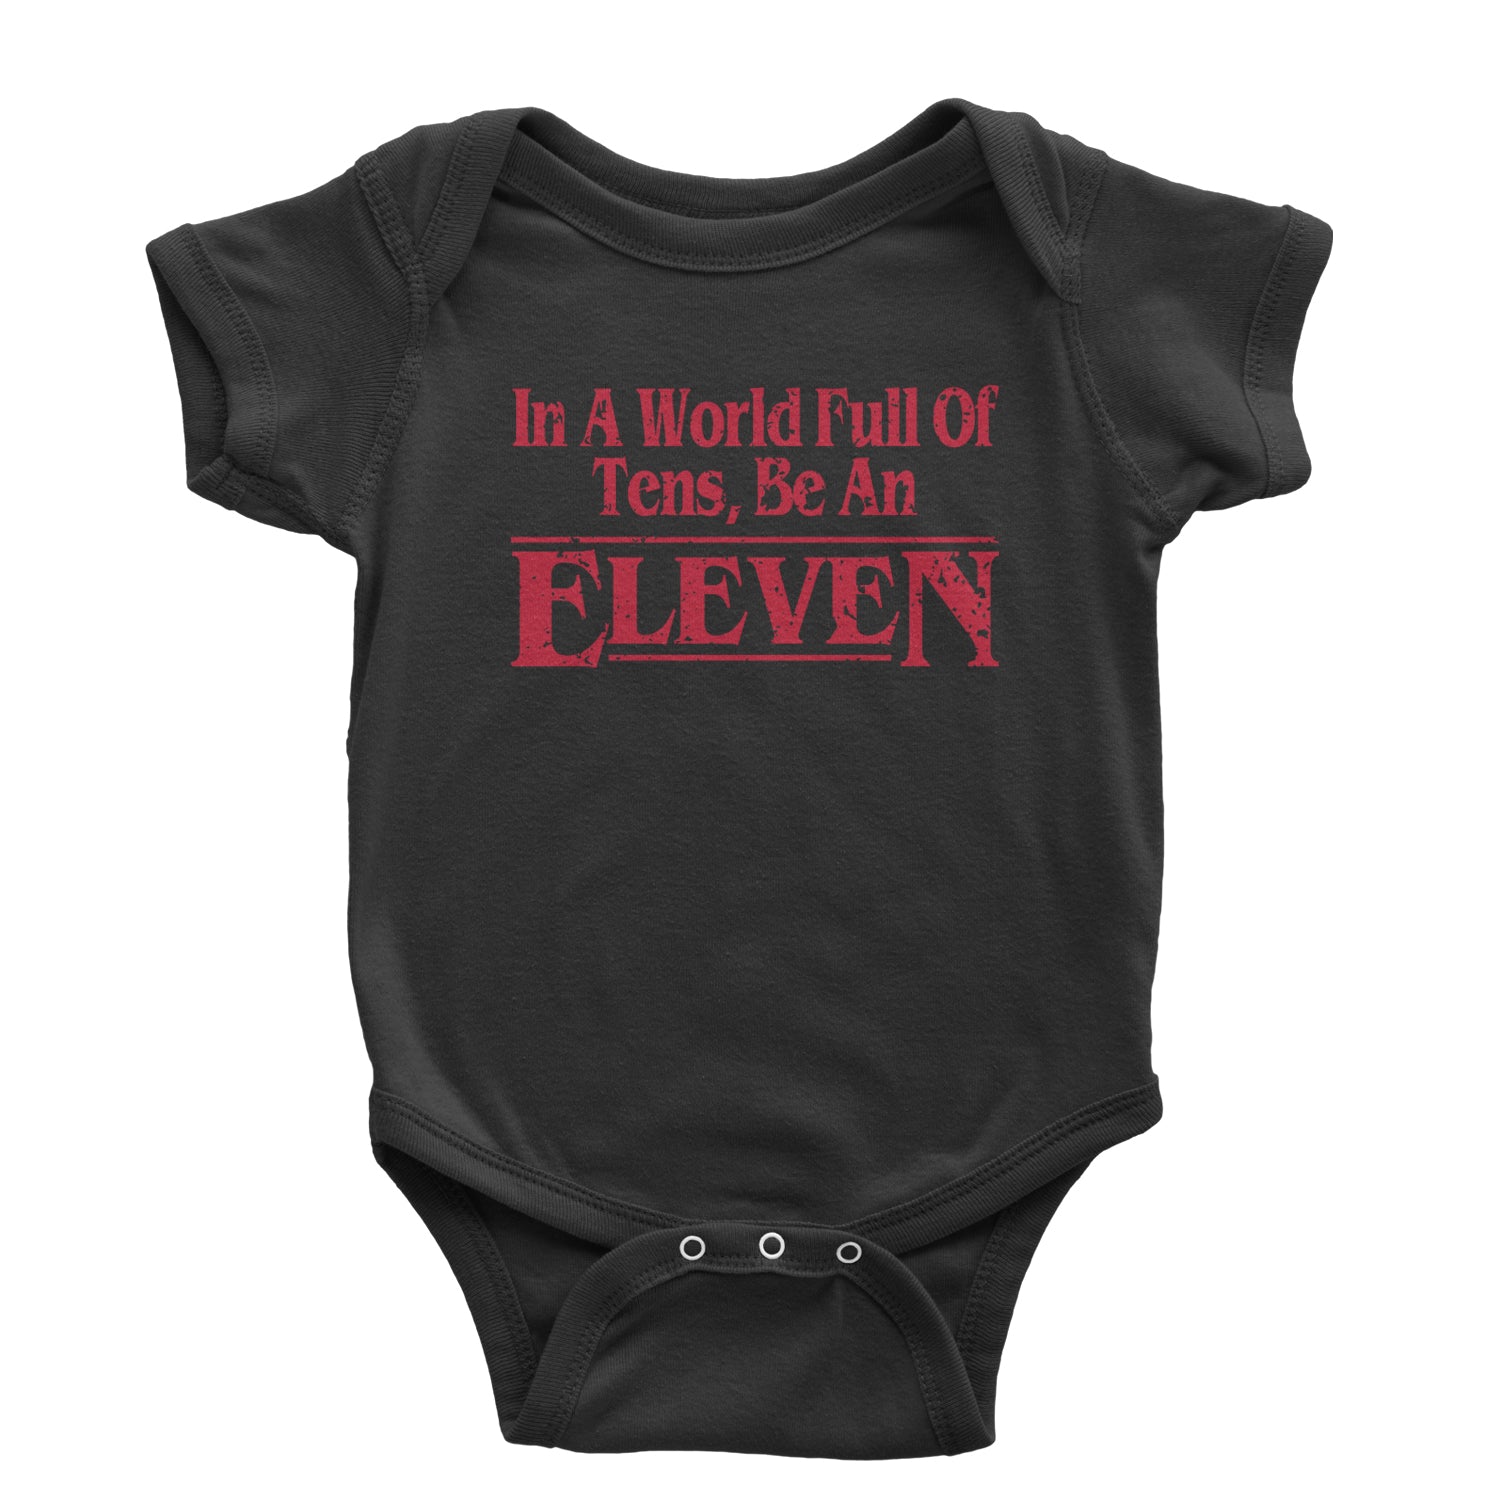 In A World Full Of Tens, Be An Eleven Infant One-Piece Romper Bodysuit and Toddler T-shirt